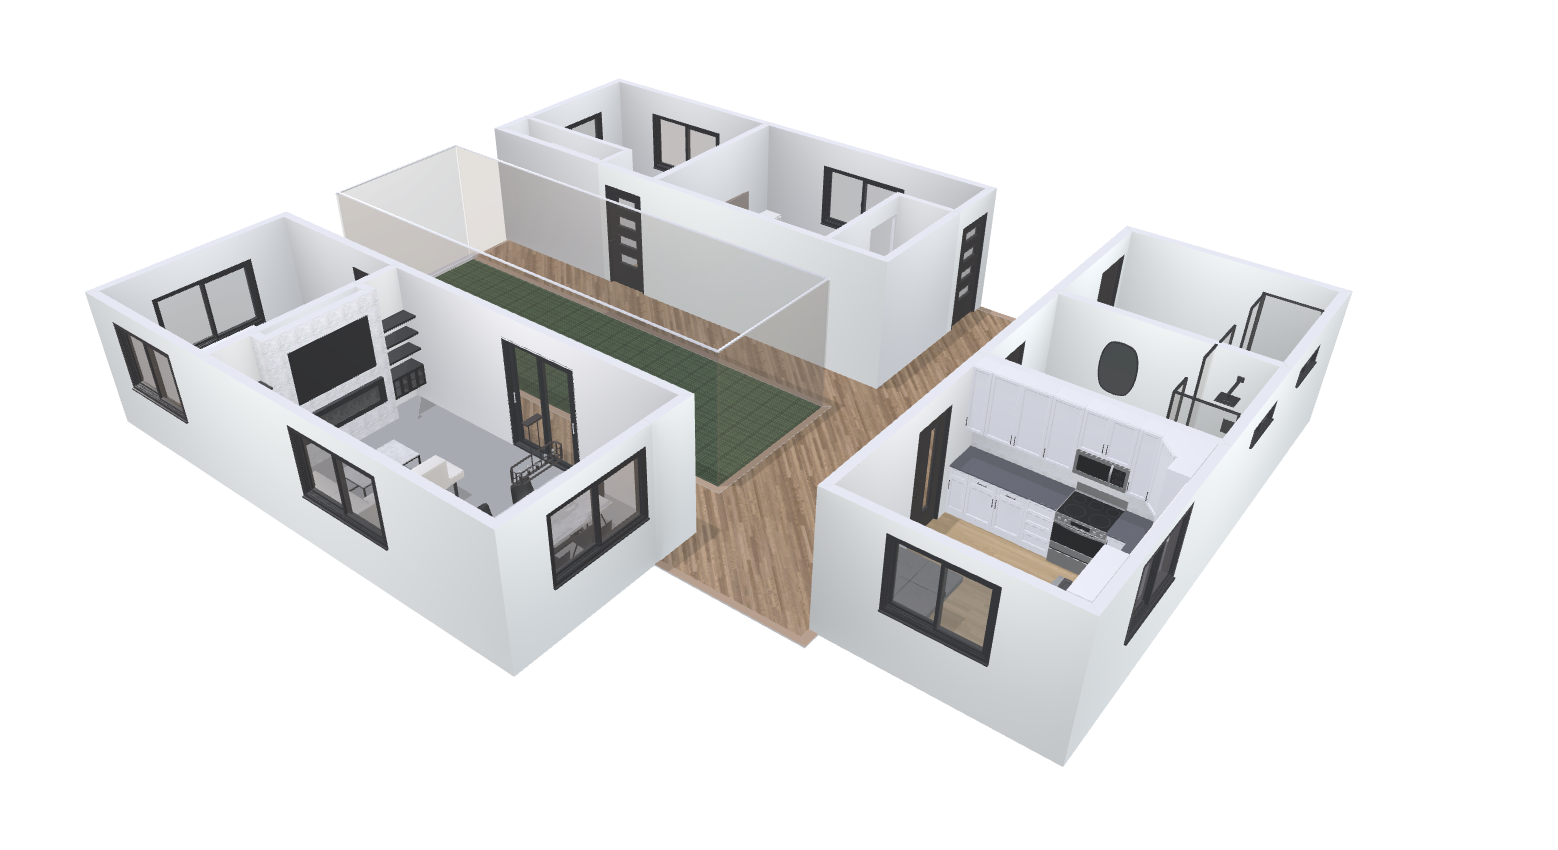 A three-dimensional rendering of what the final product is supposed to look like. The sustainable and mobile three-piece design includes a kitchen, living-dining area, two bedrooms, and two bathrooms. 